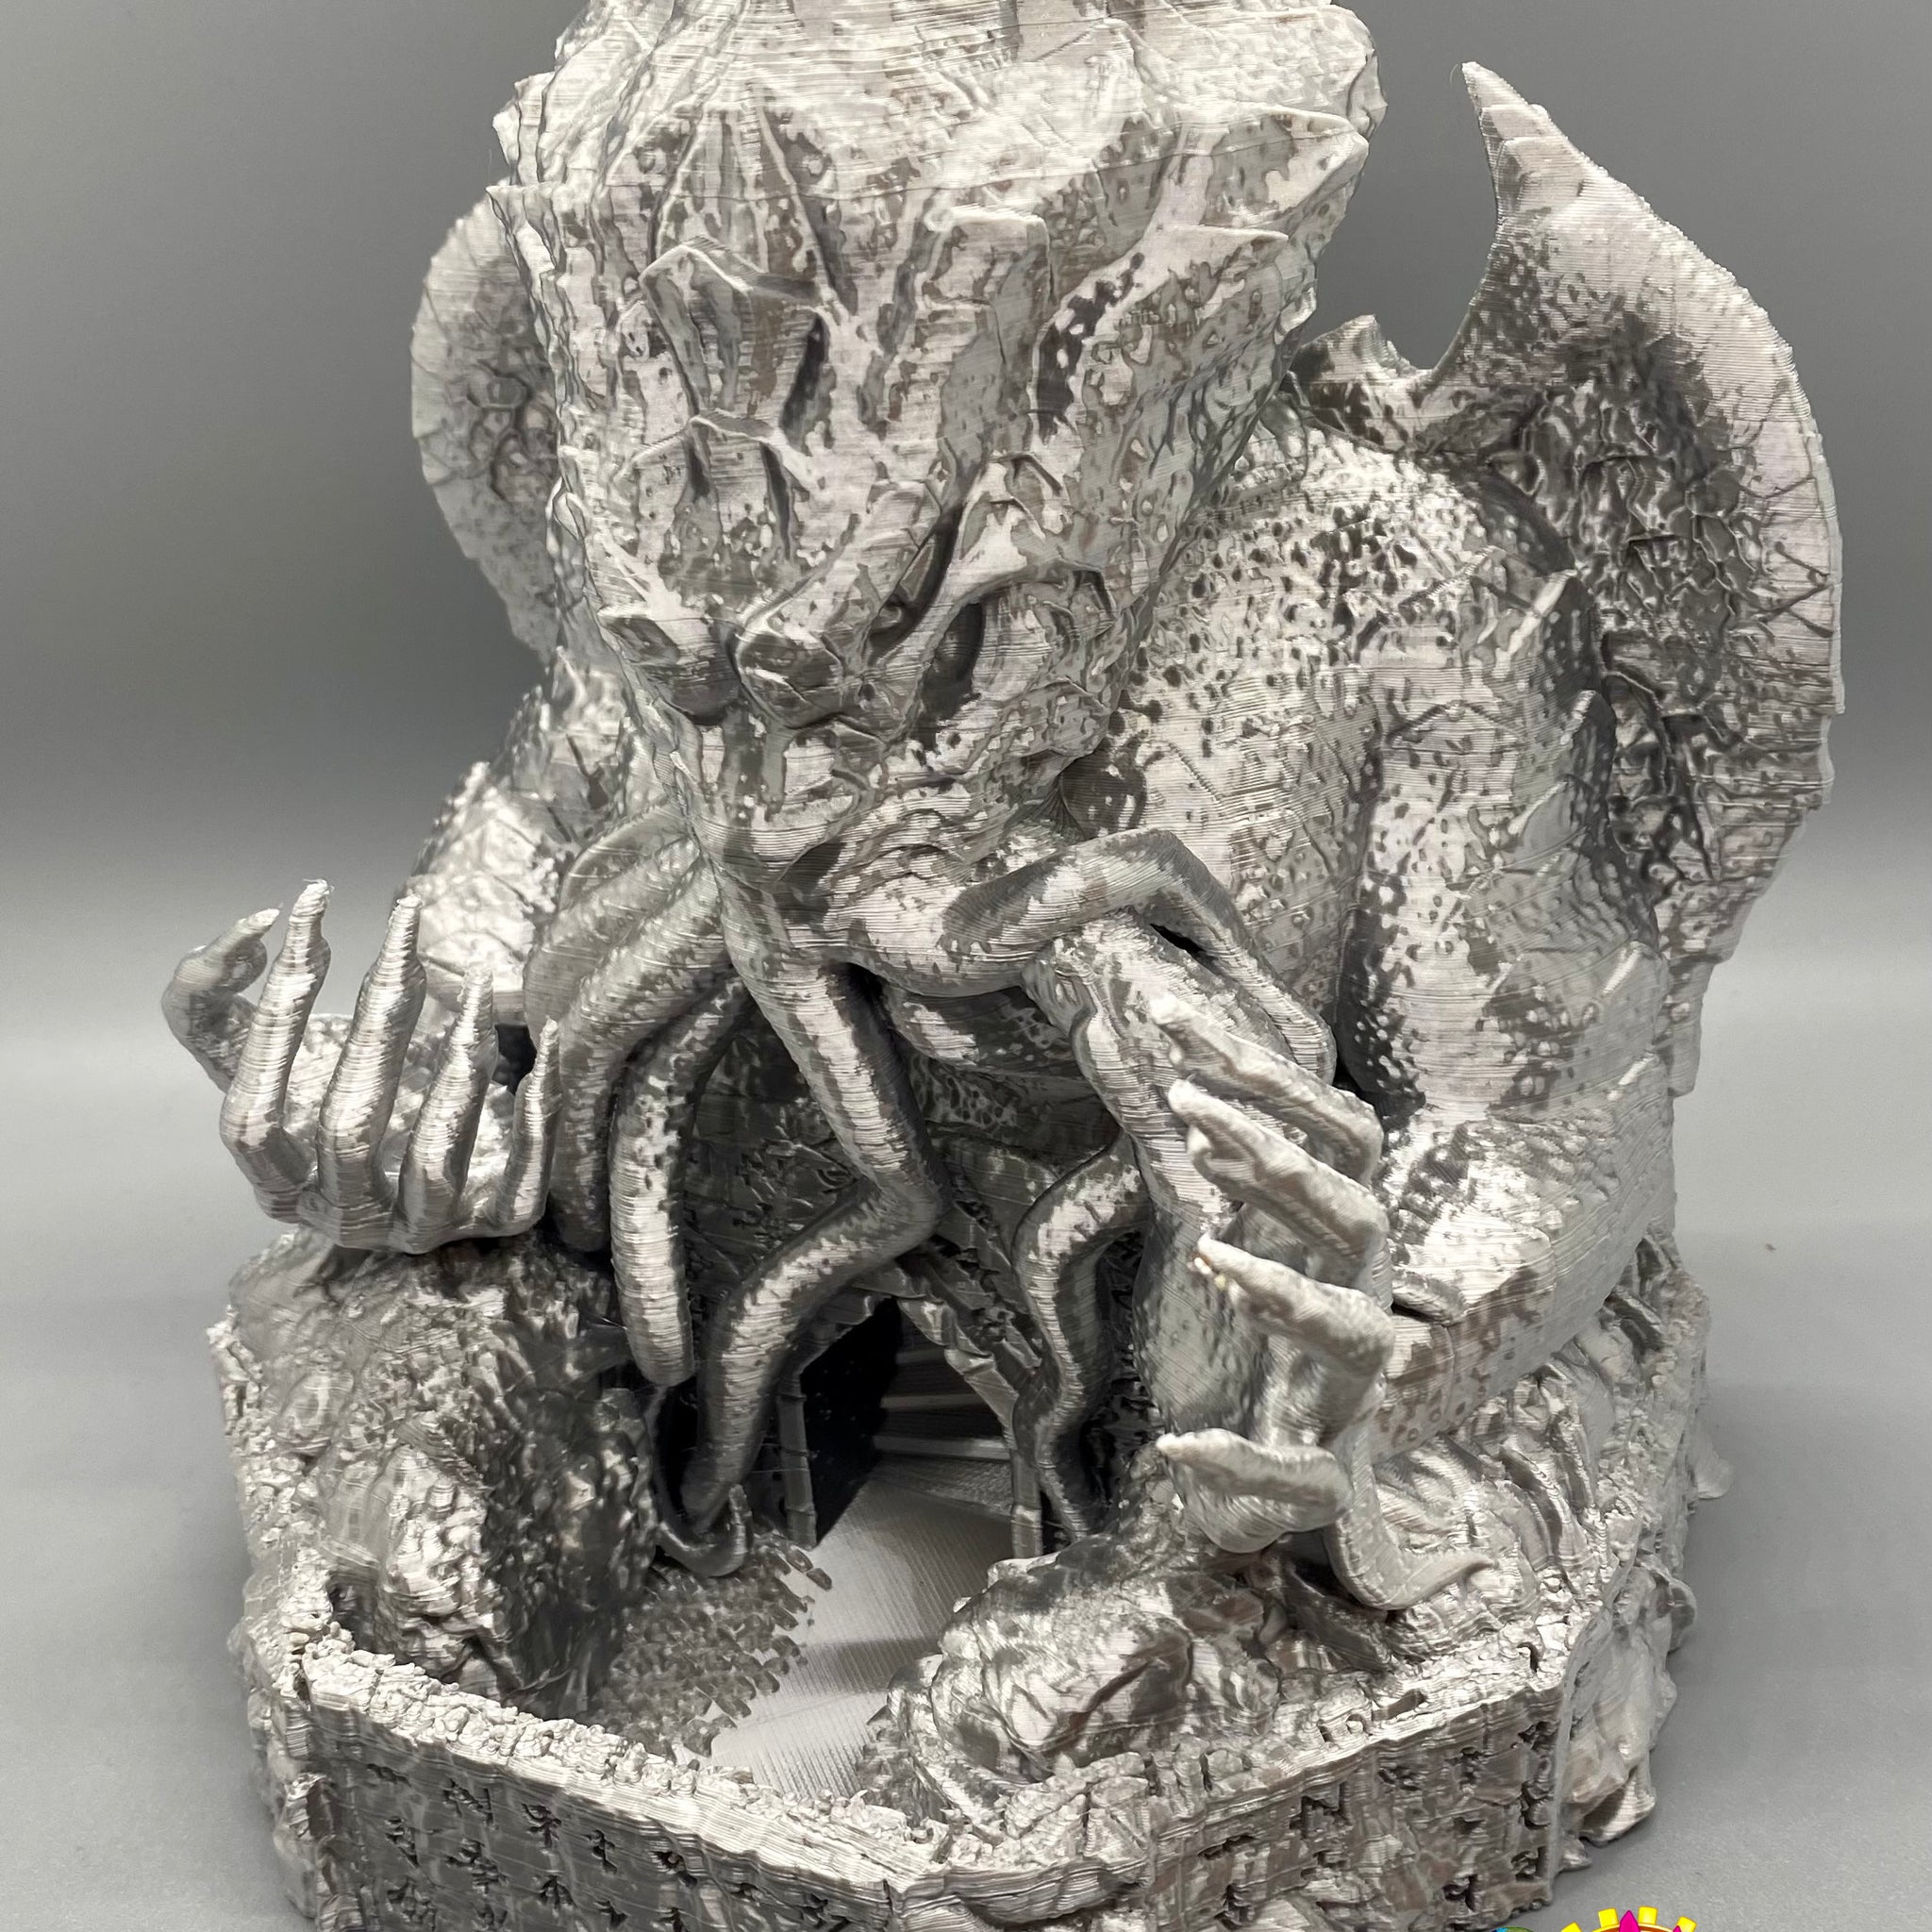 Fates End Cthulhu Dice Tower